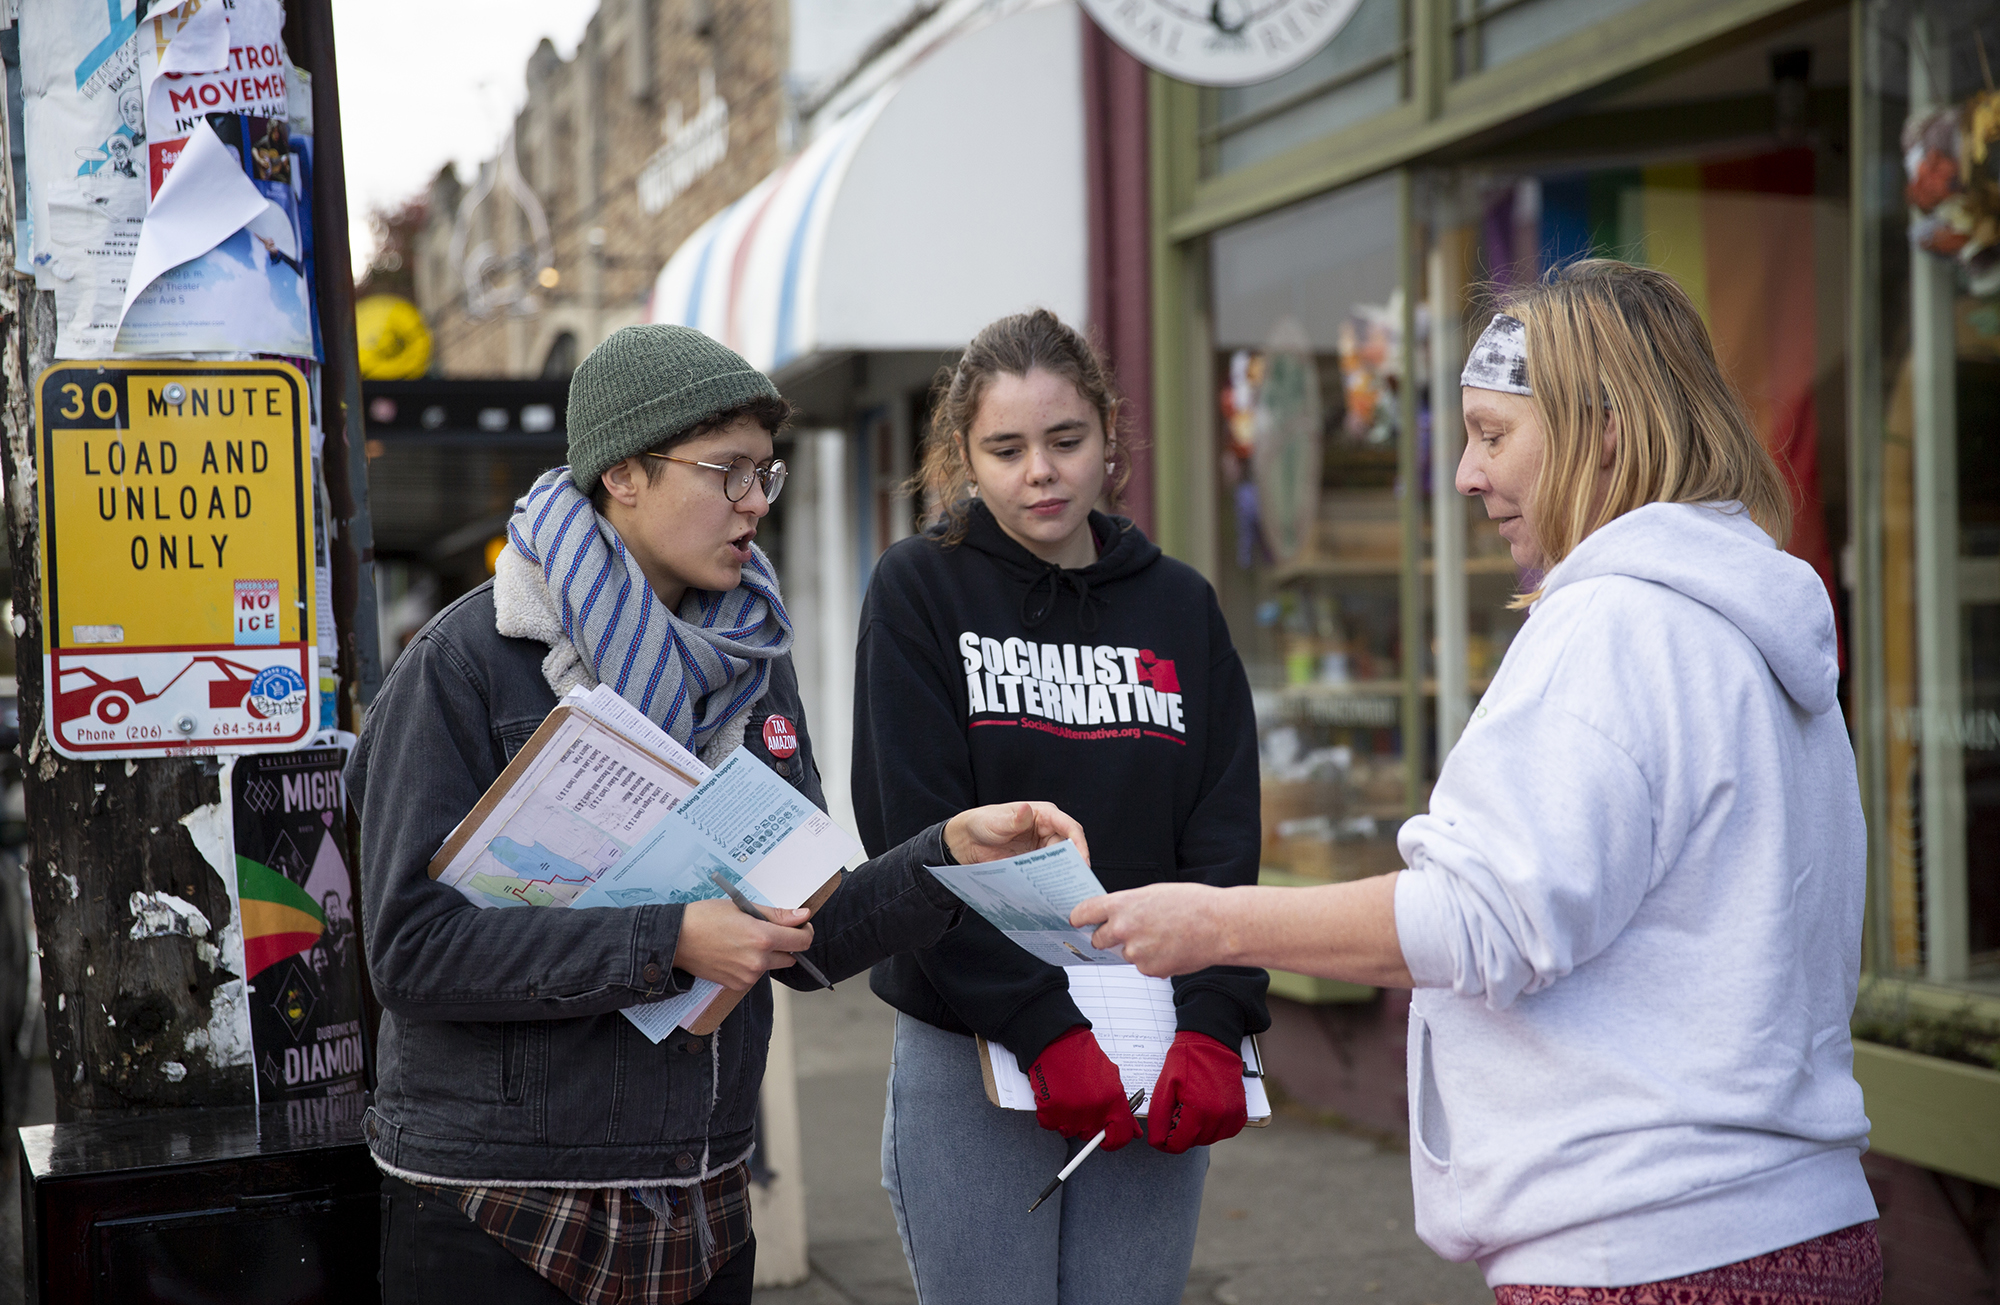 Two volunteers with the Sawant campaign talk to a person on the sidewalk.